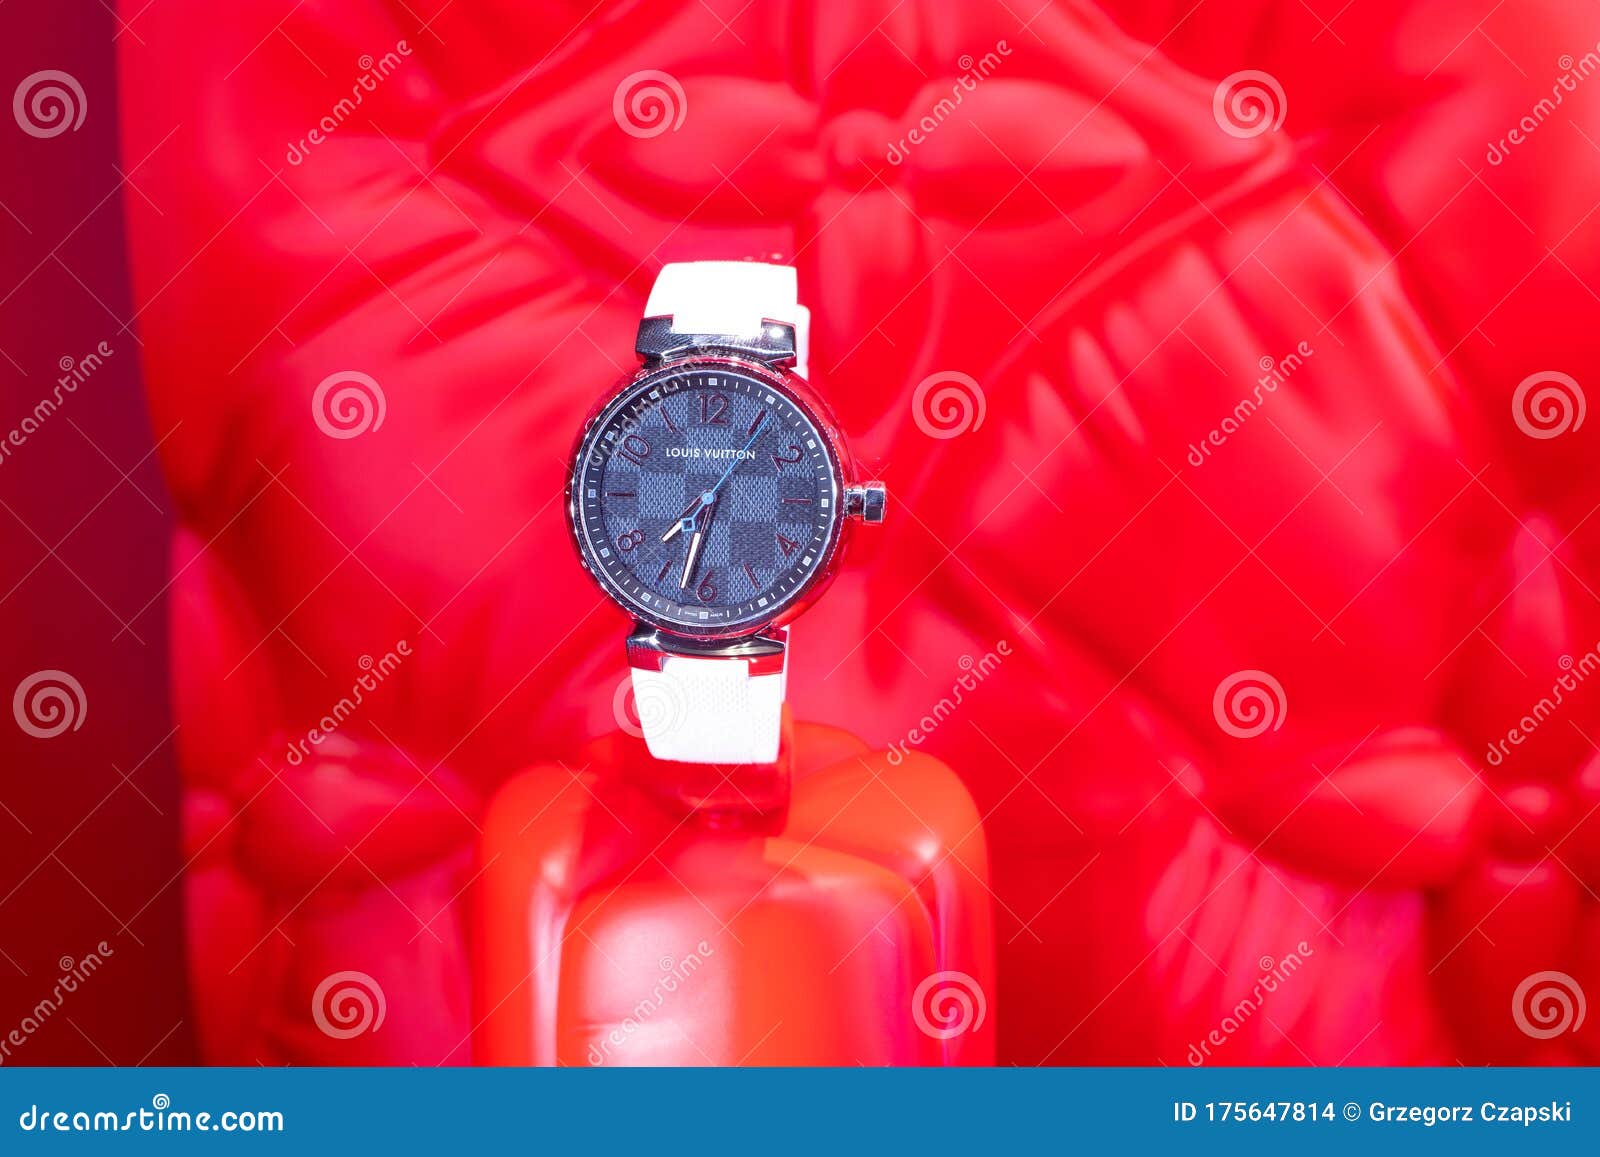 Louis Vuitton Watch on Display for Sale, LV Louis Vuitton is Fashion House  and Luxury Retail Company Editorial Stock Image - Image of exterior,  jewelry: 175647814